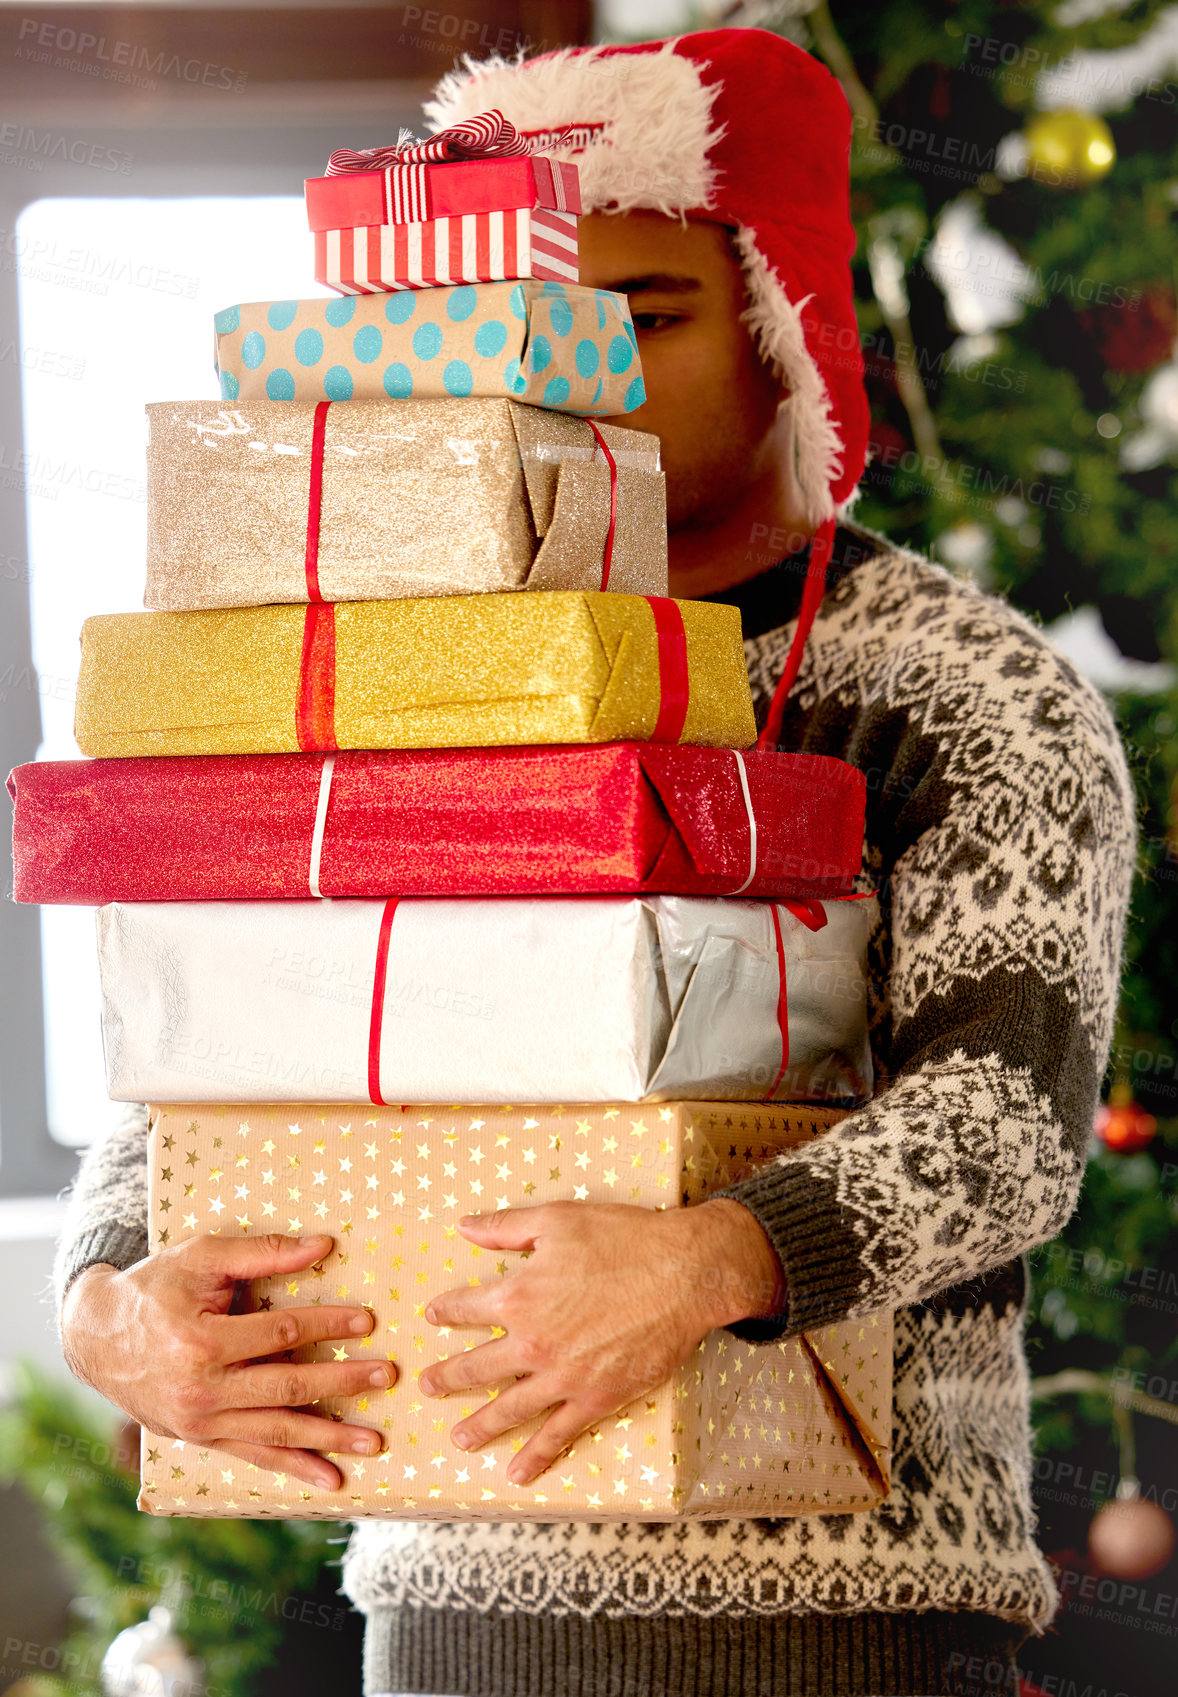 Buy stock photo Shot of a young man carrying a stack on gifts at home